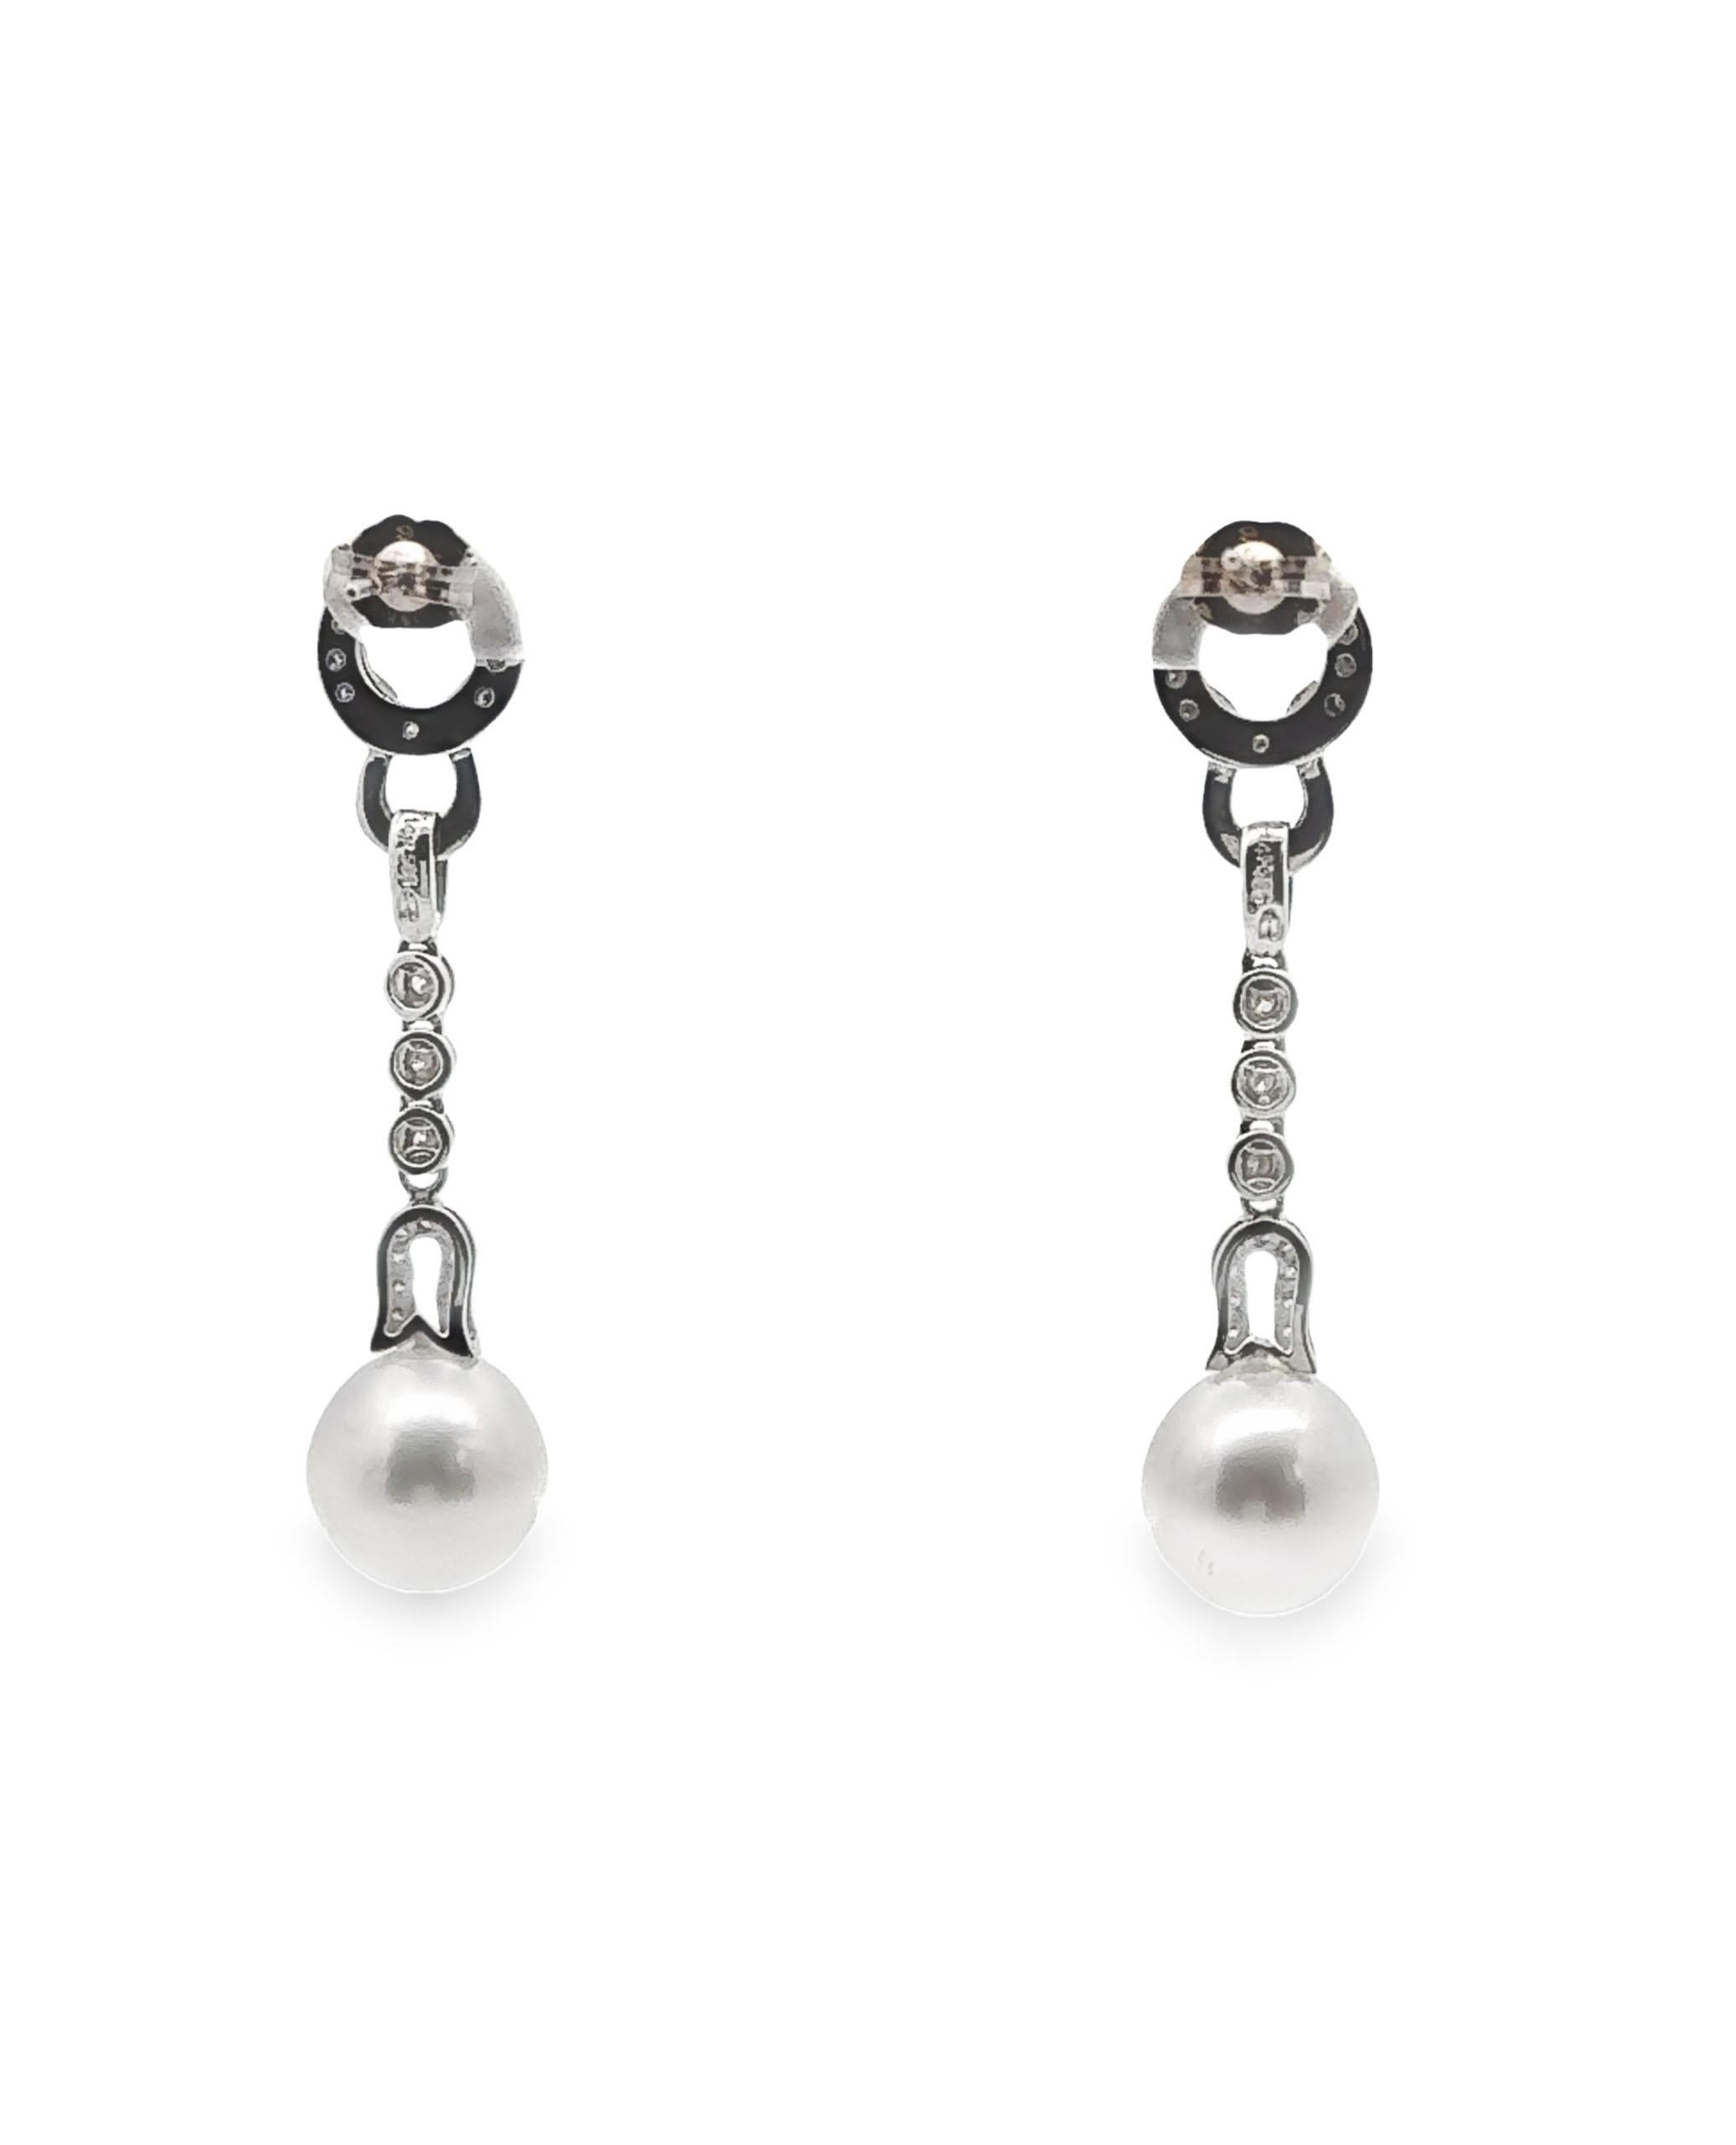 Women's 14K White Gold Long Earrings with South Sea Pearls and Diamonds